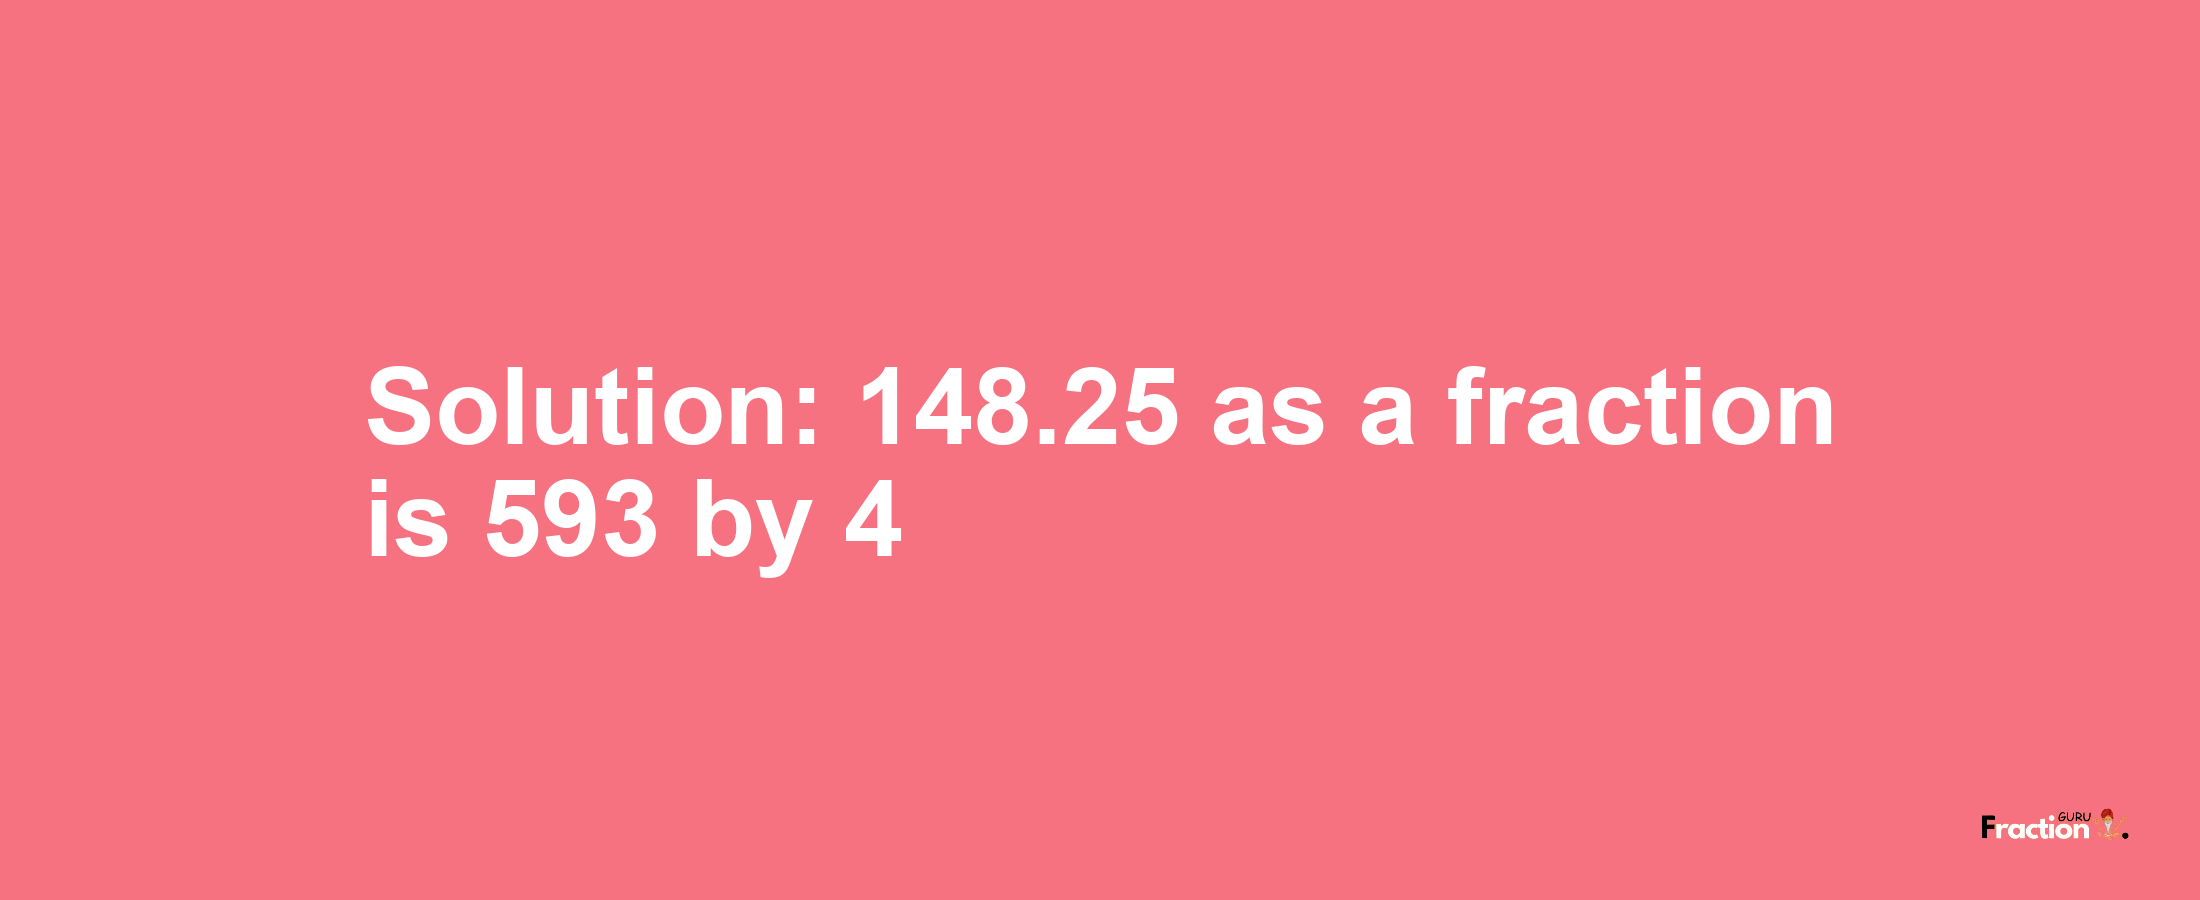 Solution:148.25 as a fraction is 593/4